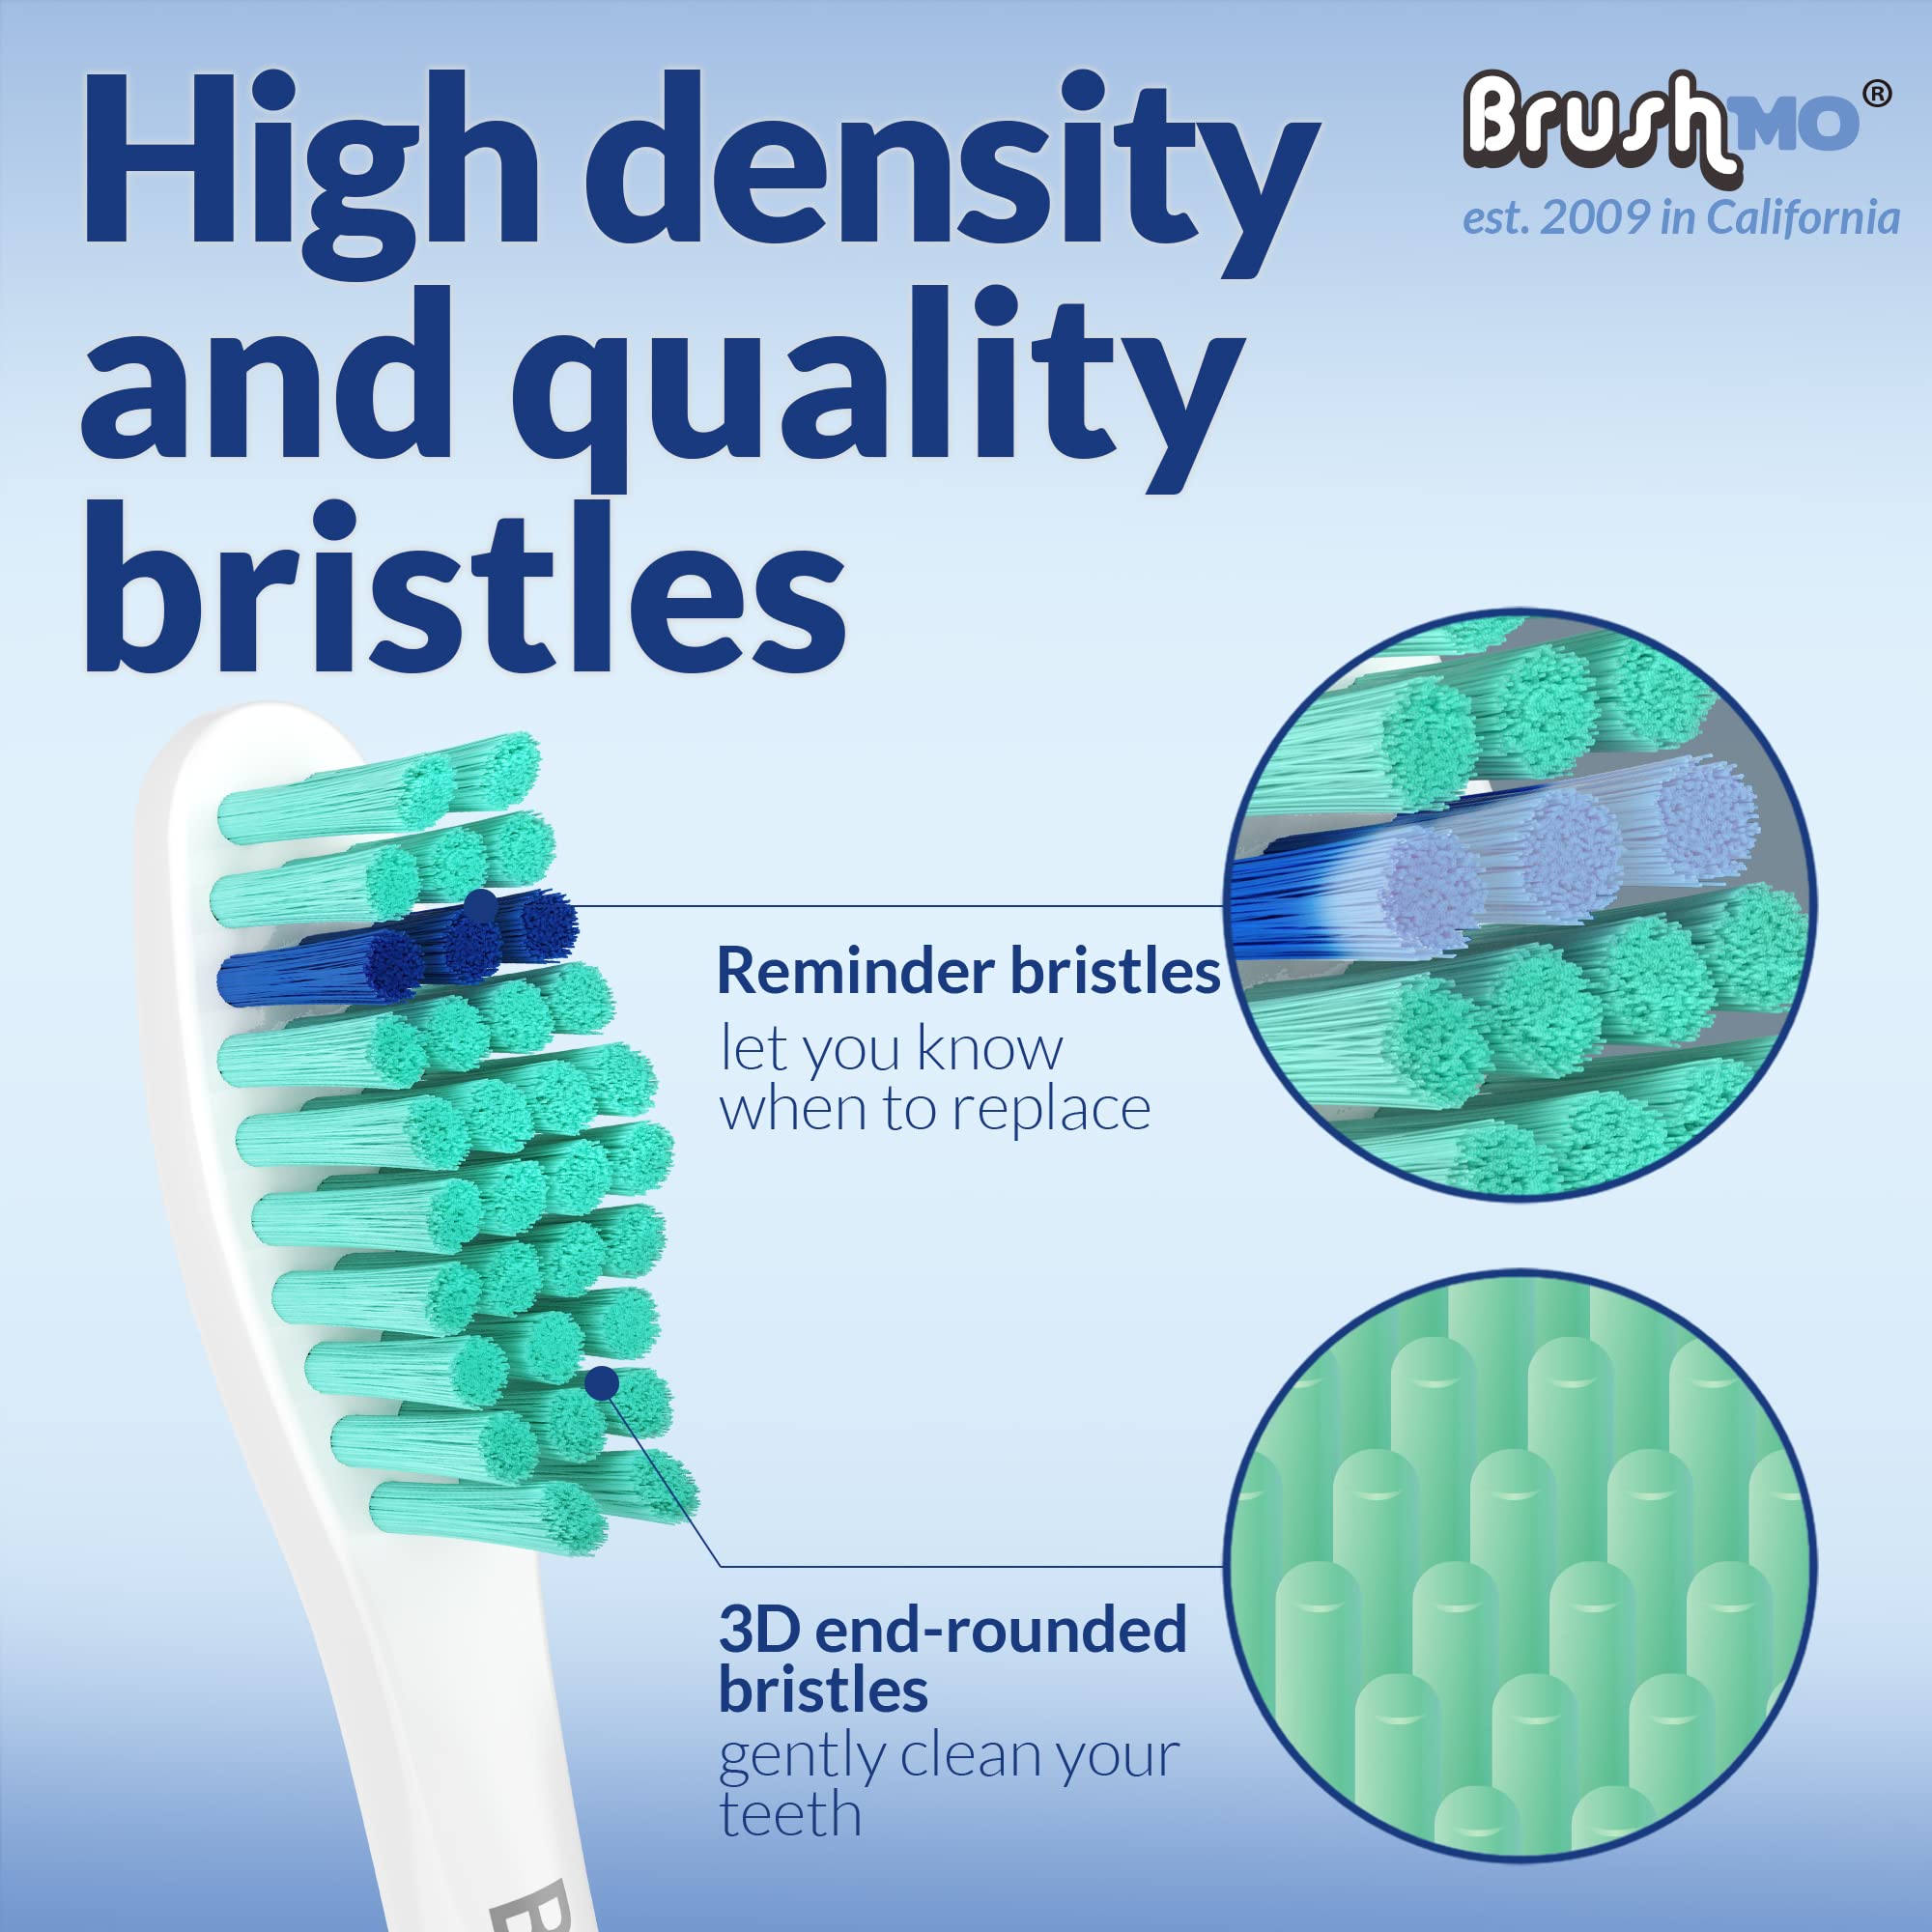 Replacement Toothbrush Heads for Philips Sonicare E-Series HX7022/66, 6 Pack, Fits Sonicare Essence, Xtreme, Elite, Advance, and CleanCare Electric Toothbrush with Hygienic caps by Brushmo